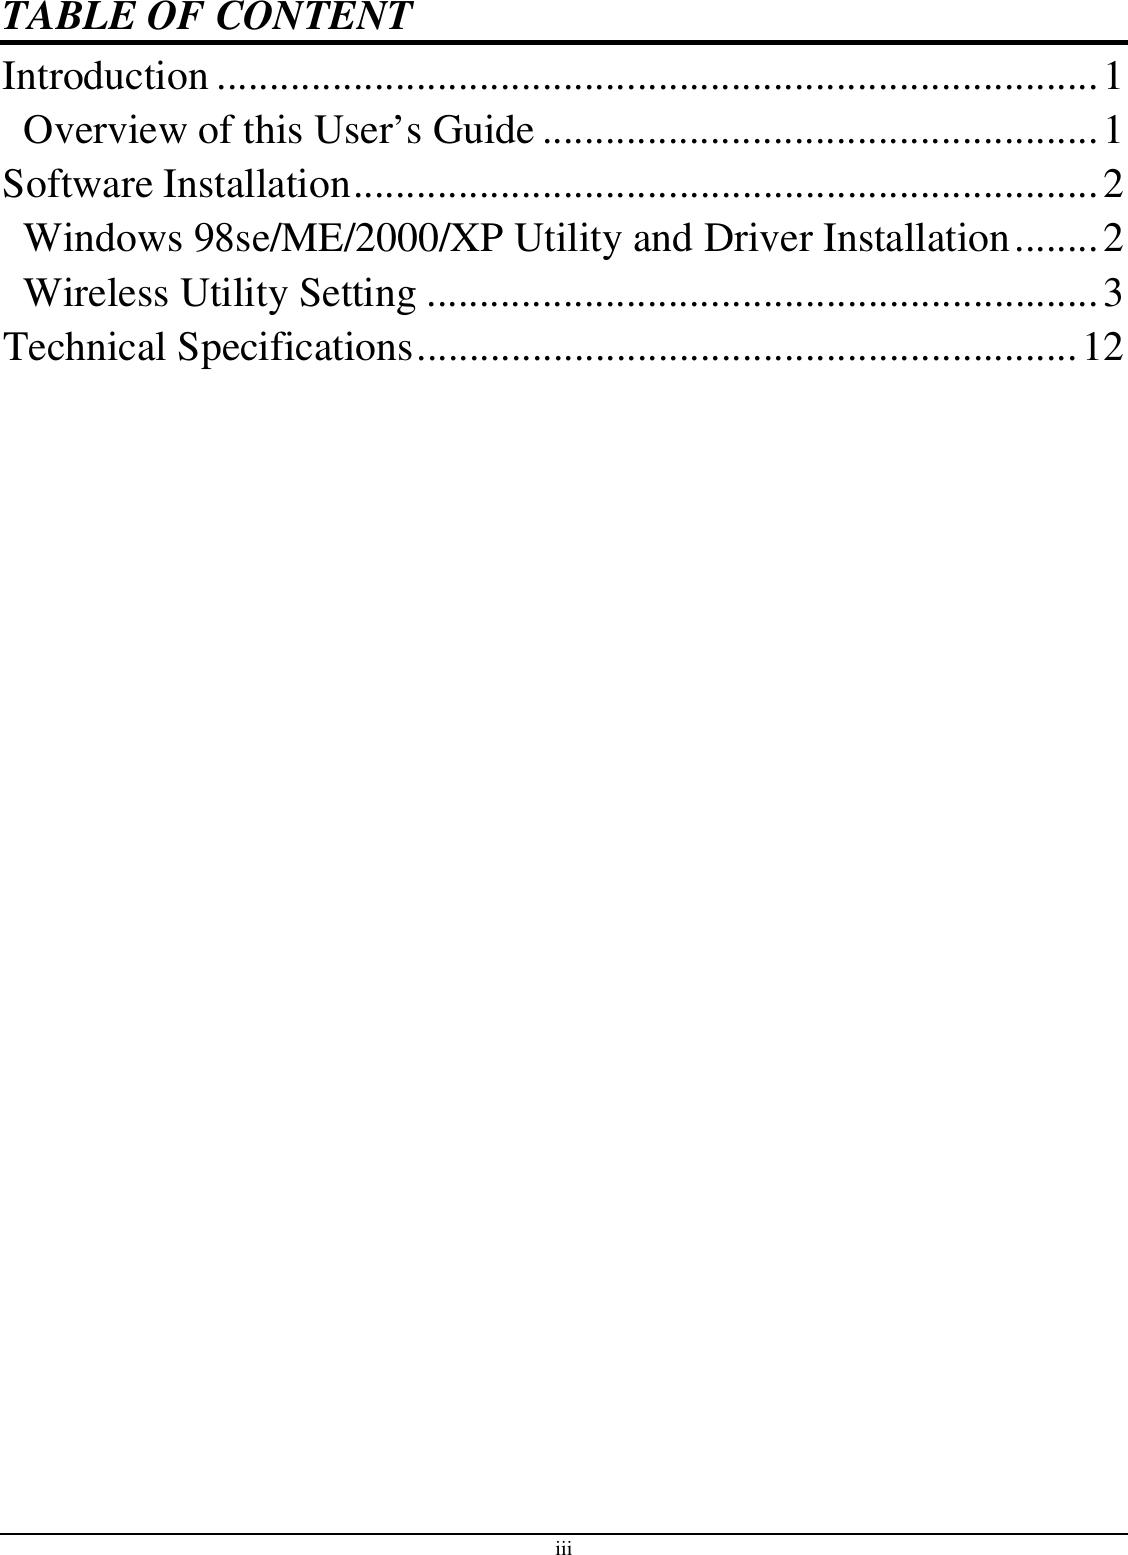 iii TABLE OF CONTENT Introduction ....................................................................................1 Overview of this User’s Guide .....................................................1 Software Installation.......................................................................2 Windows 98se/ME/2000/XP Utility and Driver Installation........2 Wireless Utility Setting ................................................................3 Technical Specifications...............................................................12  